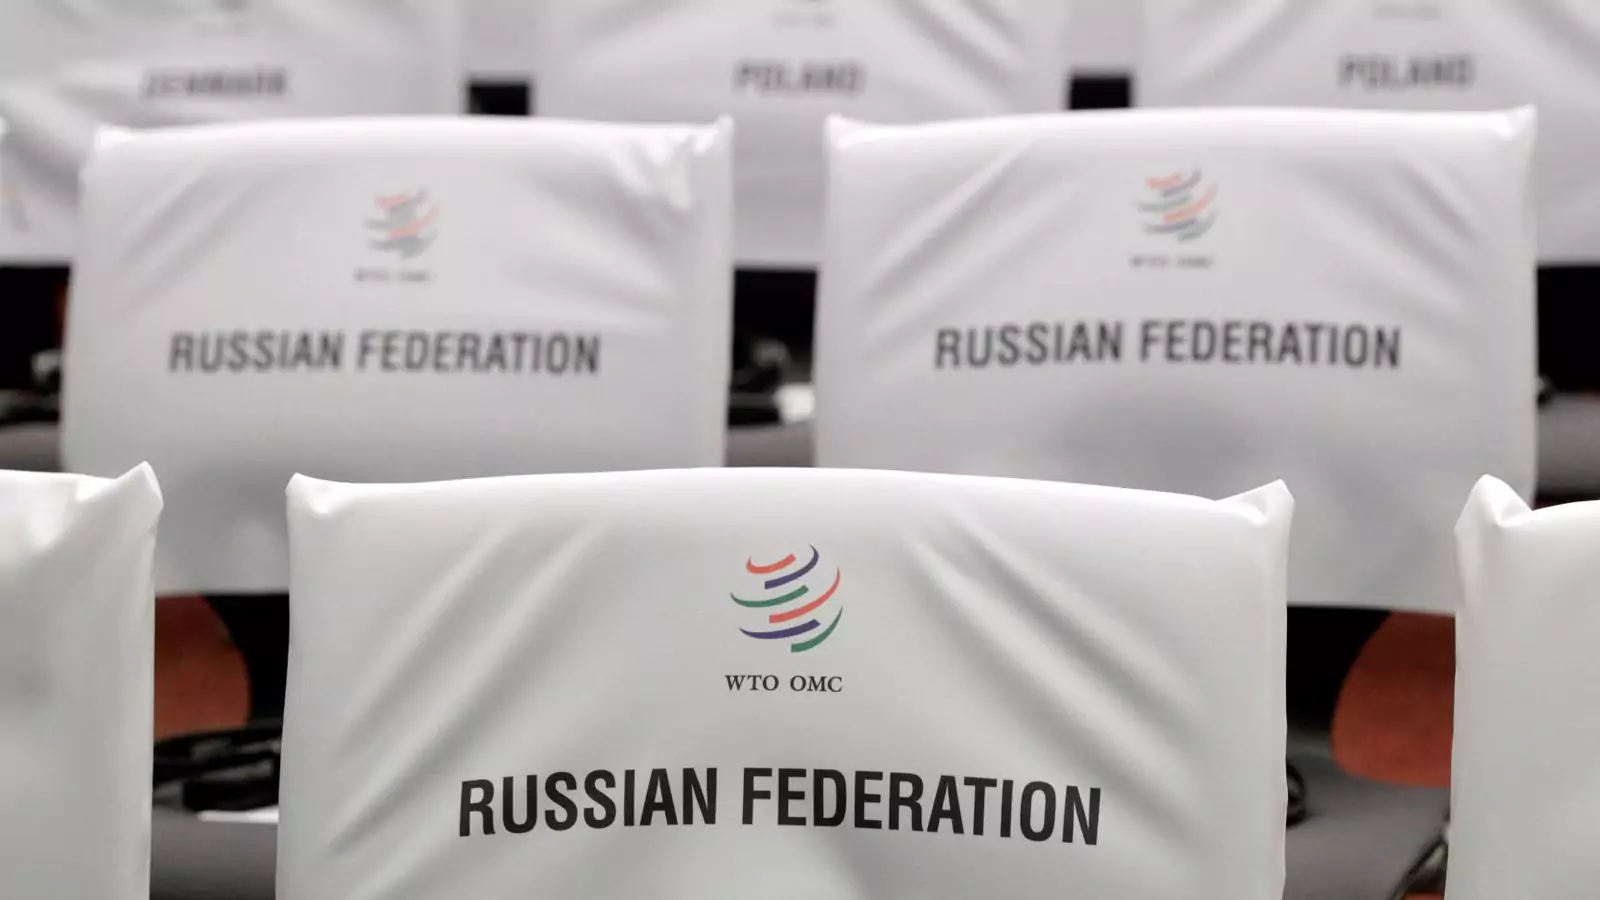 Seats for delegates are pictured before the ceremony marking the accession of Russia to the WTO during the 8th WTO Ministerial Conference in Geneva in December 2011.